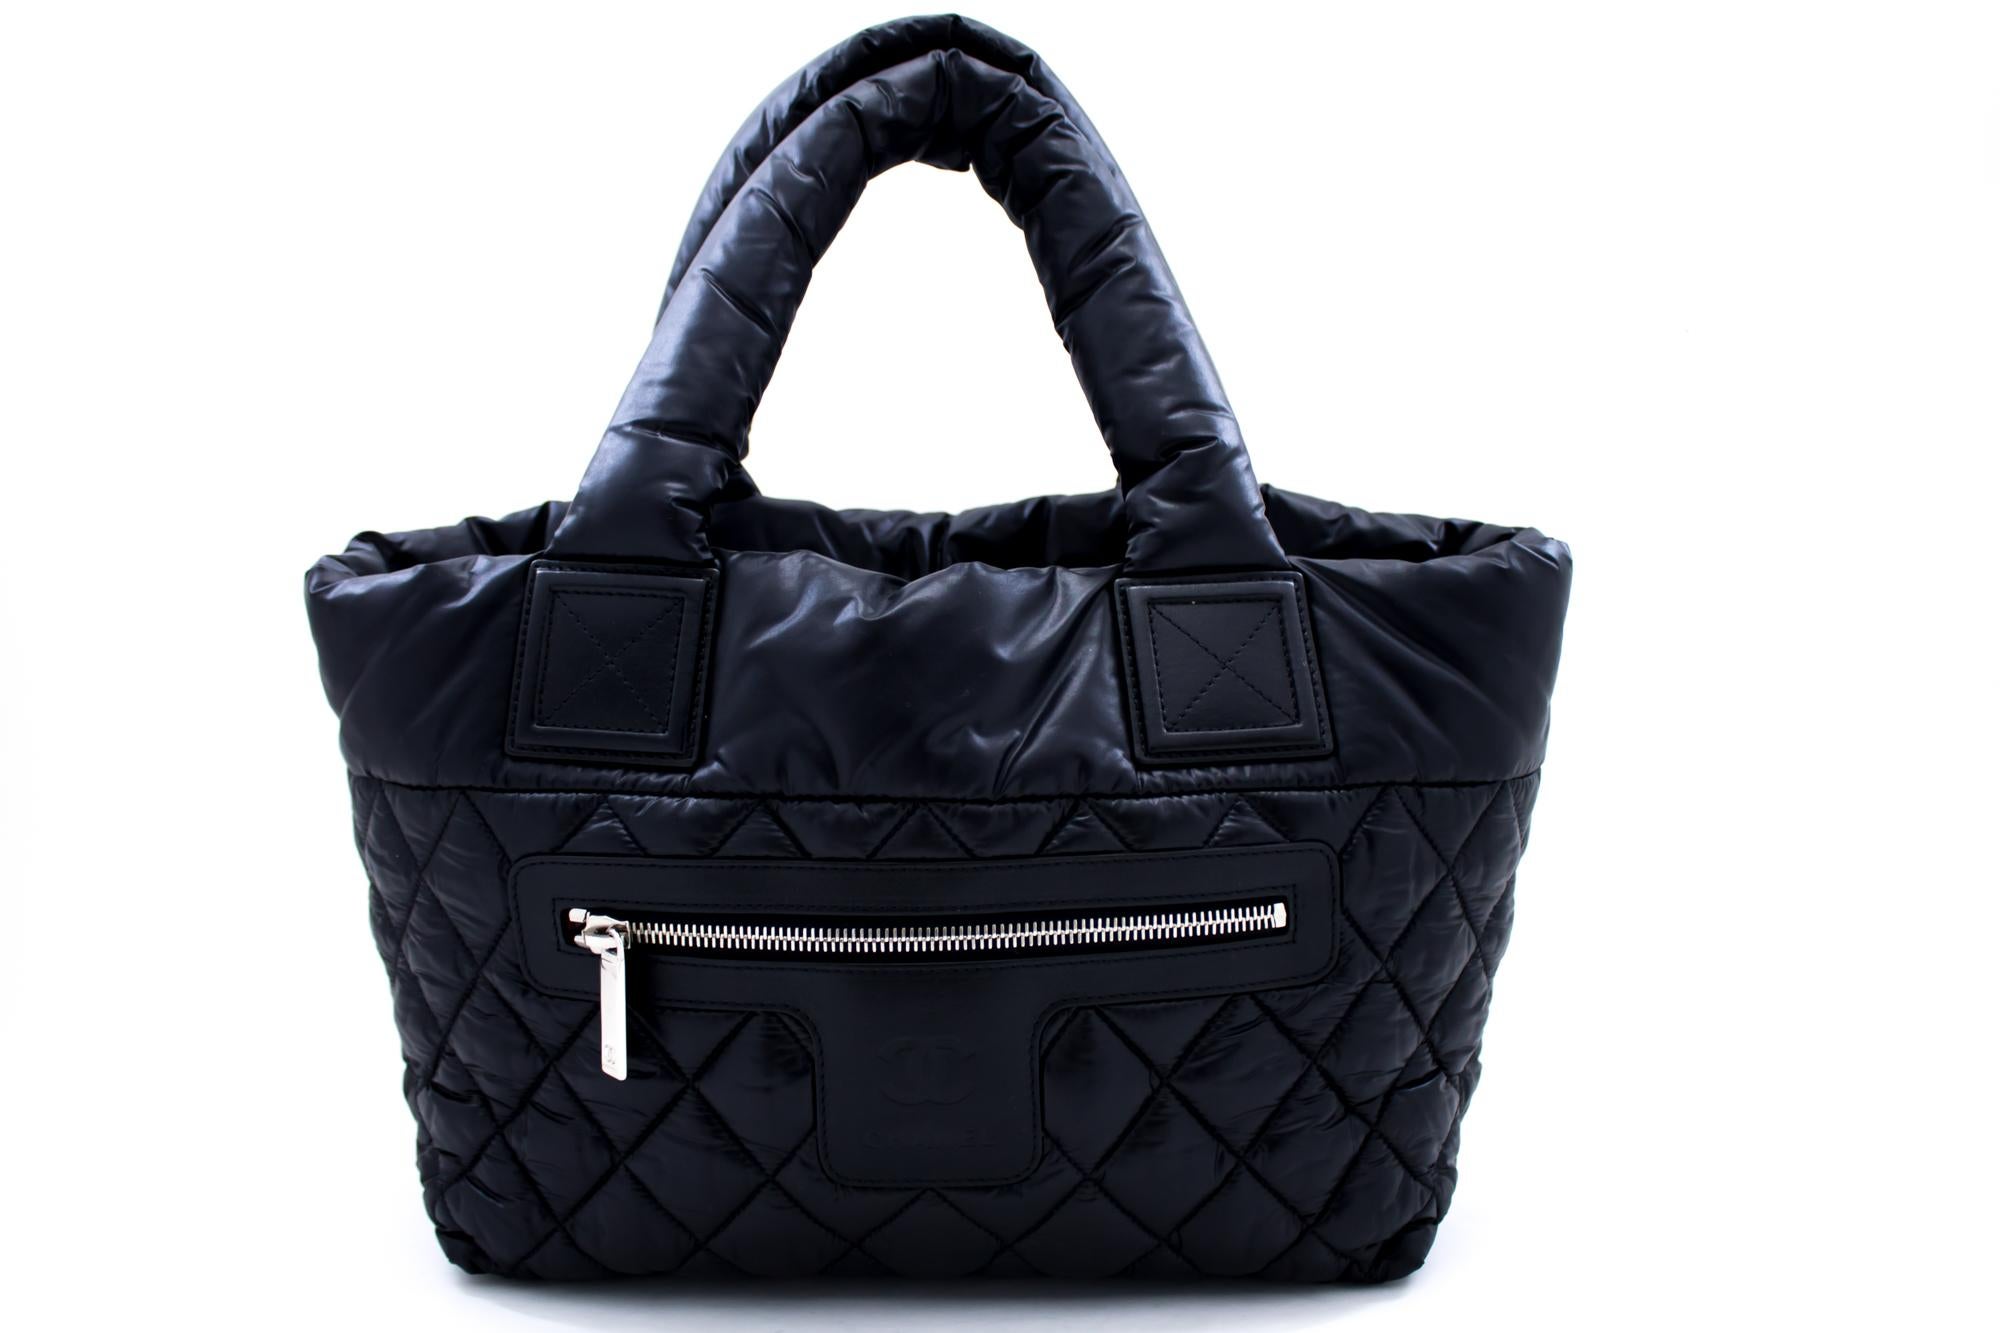 An authentic CHANEL Coco Cocoon Nylon Tote Bag Handbag Black Bordeaux Leather. The color is Black. The outside material is Nylon. The pattern is Solid. This item is Contemporary. The year of manufacture would be 2012.
Conditions & Ratings
Outside